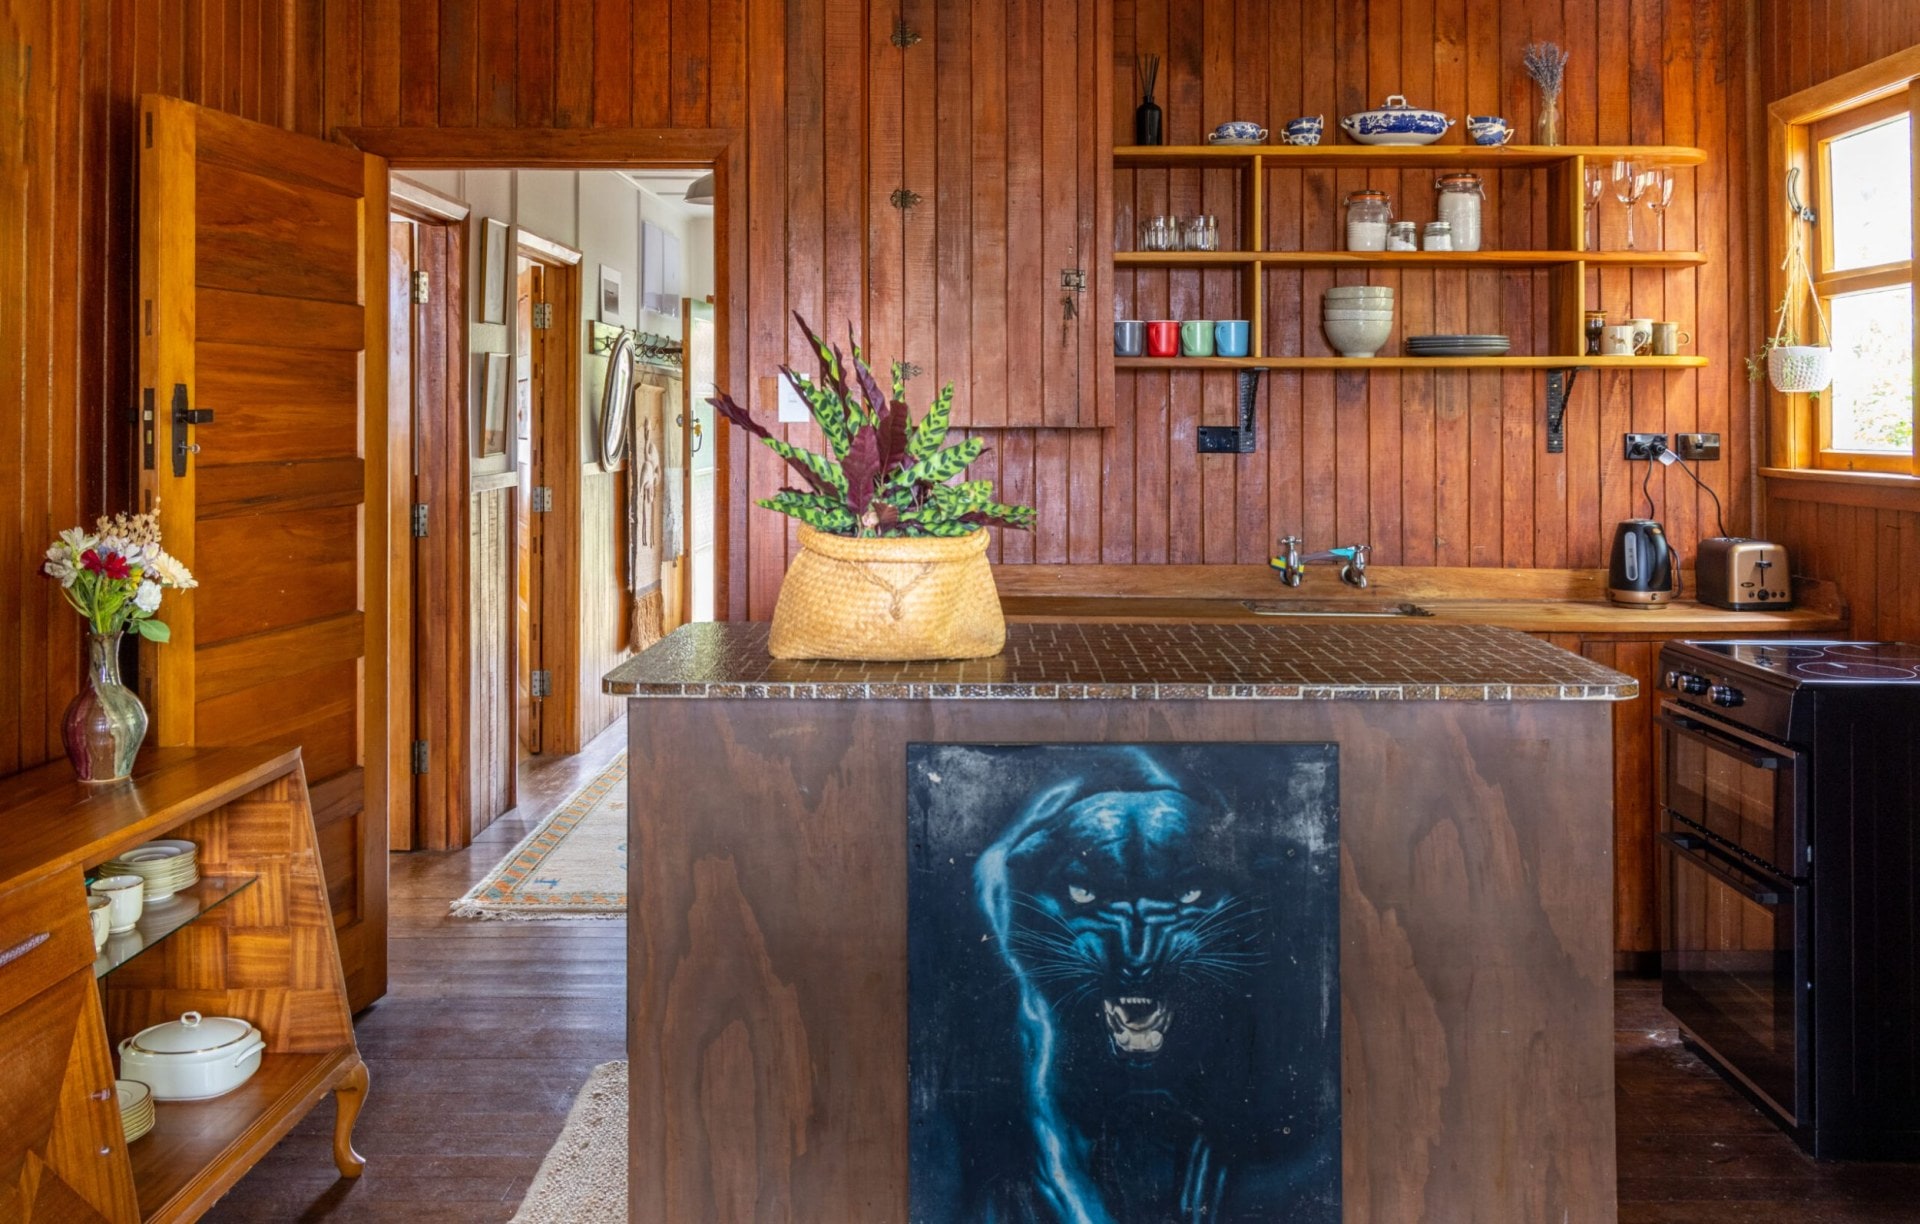 A brown wood panelled kitchen with brown benchtops and a decorative black panther painting